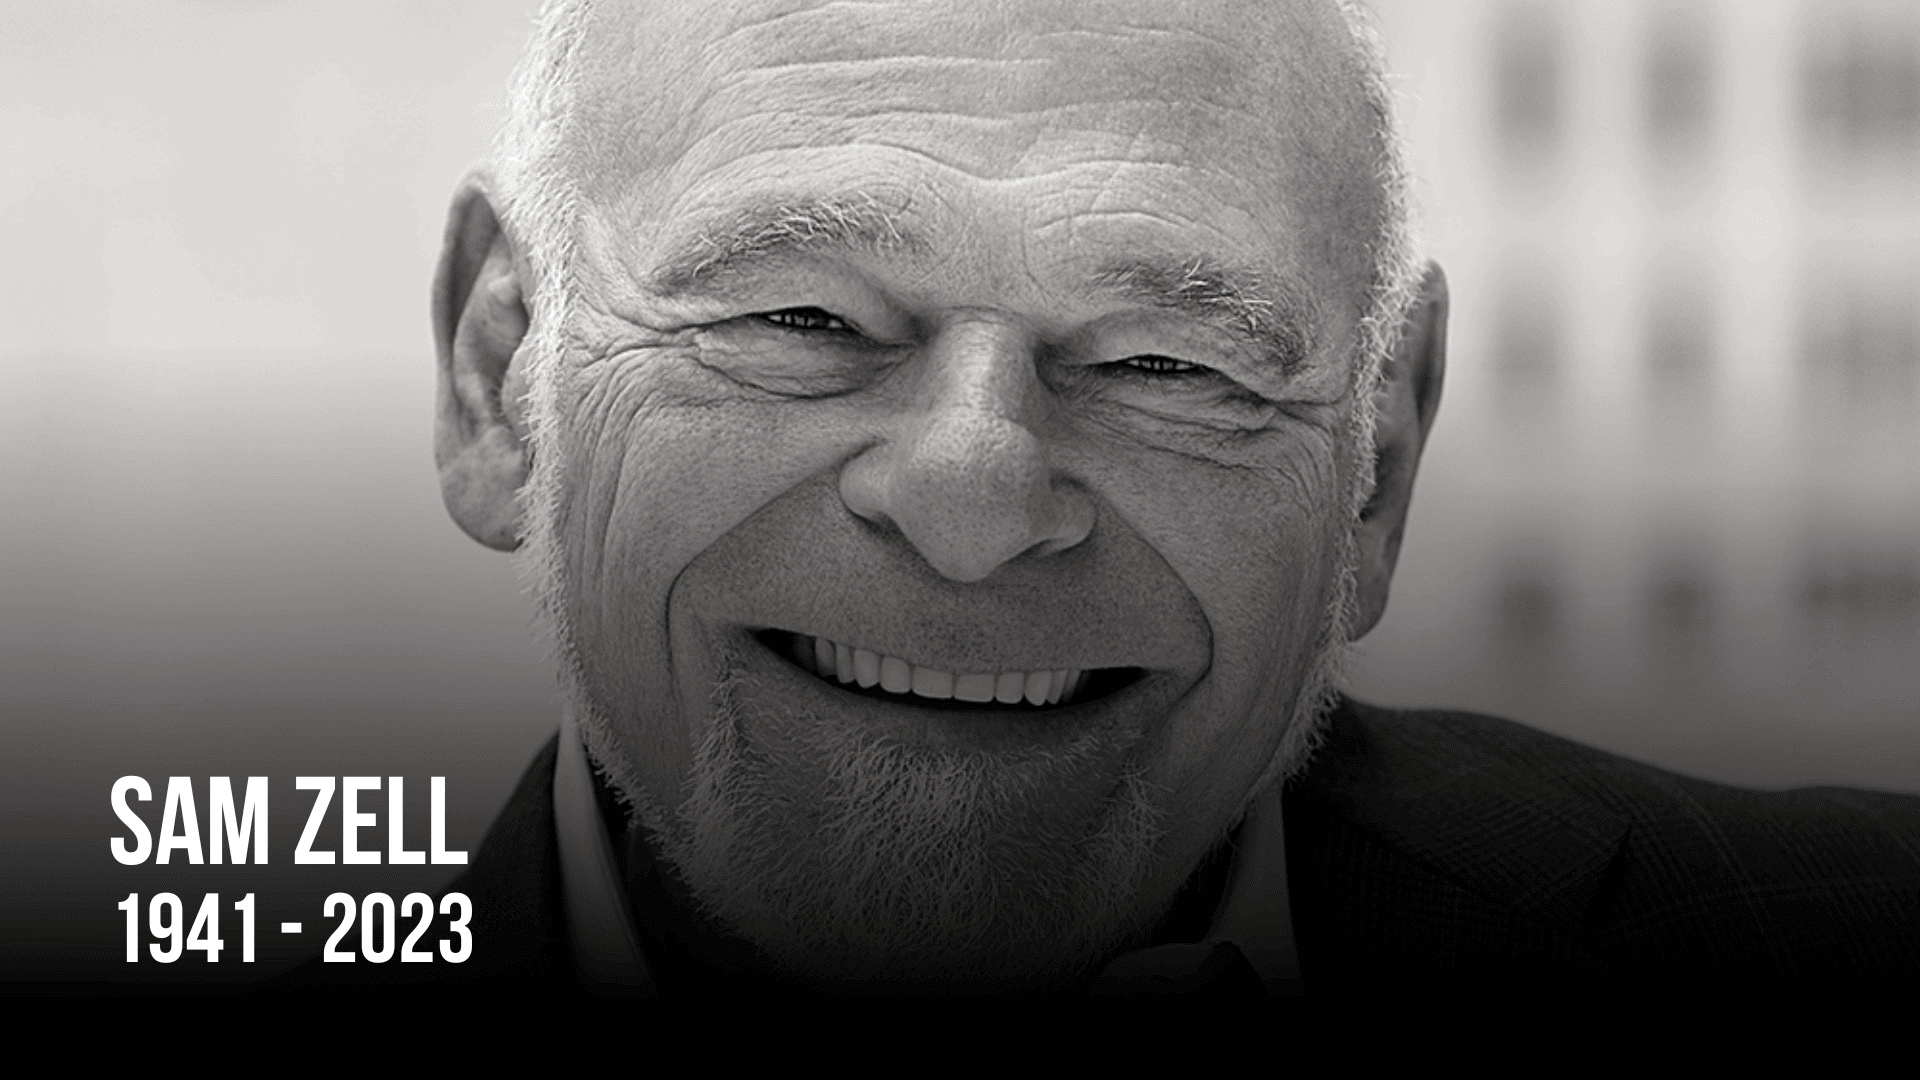 The Grave Dancer's Final Tango: Life of Real Estate Titan Sam Zell - black and white grayscale photo of Sam Zell, RIP Sam Zell 1941-2023